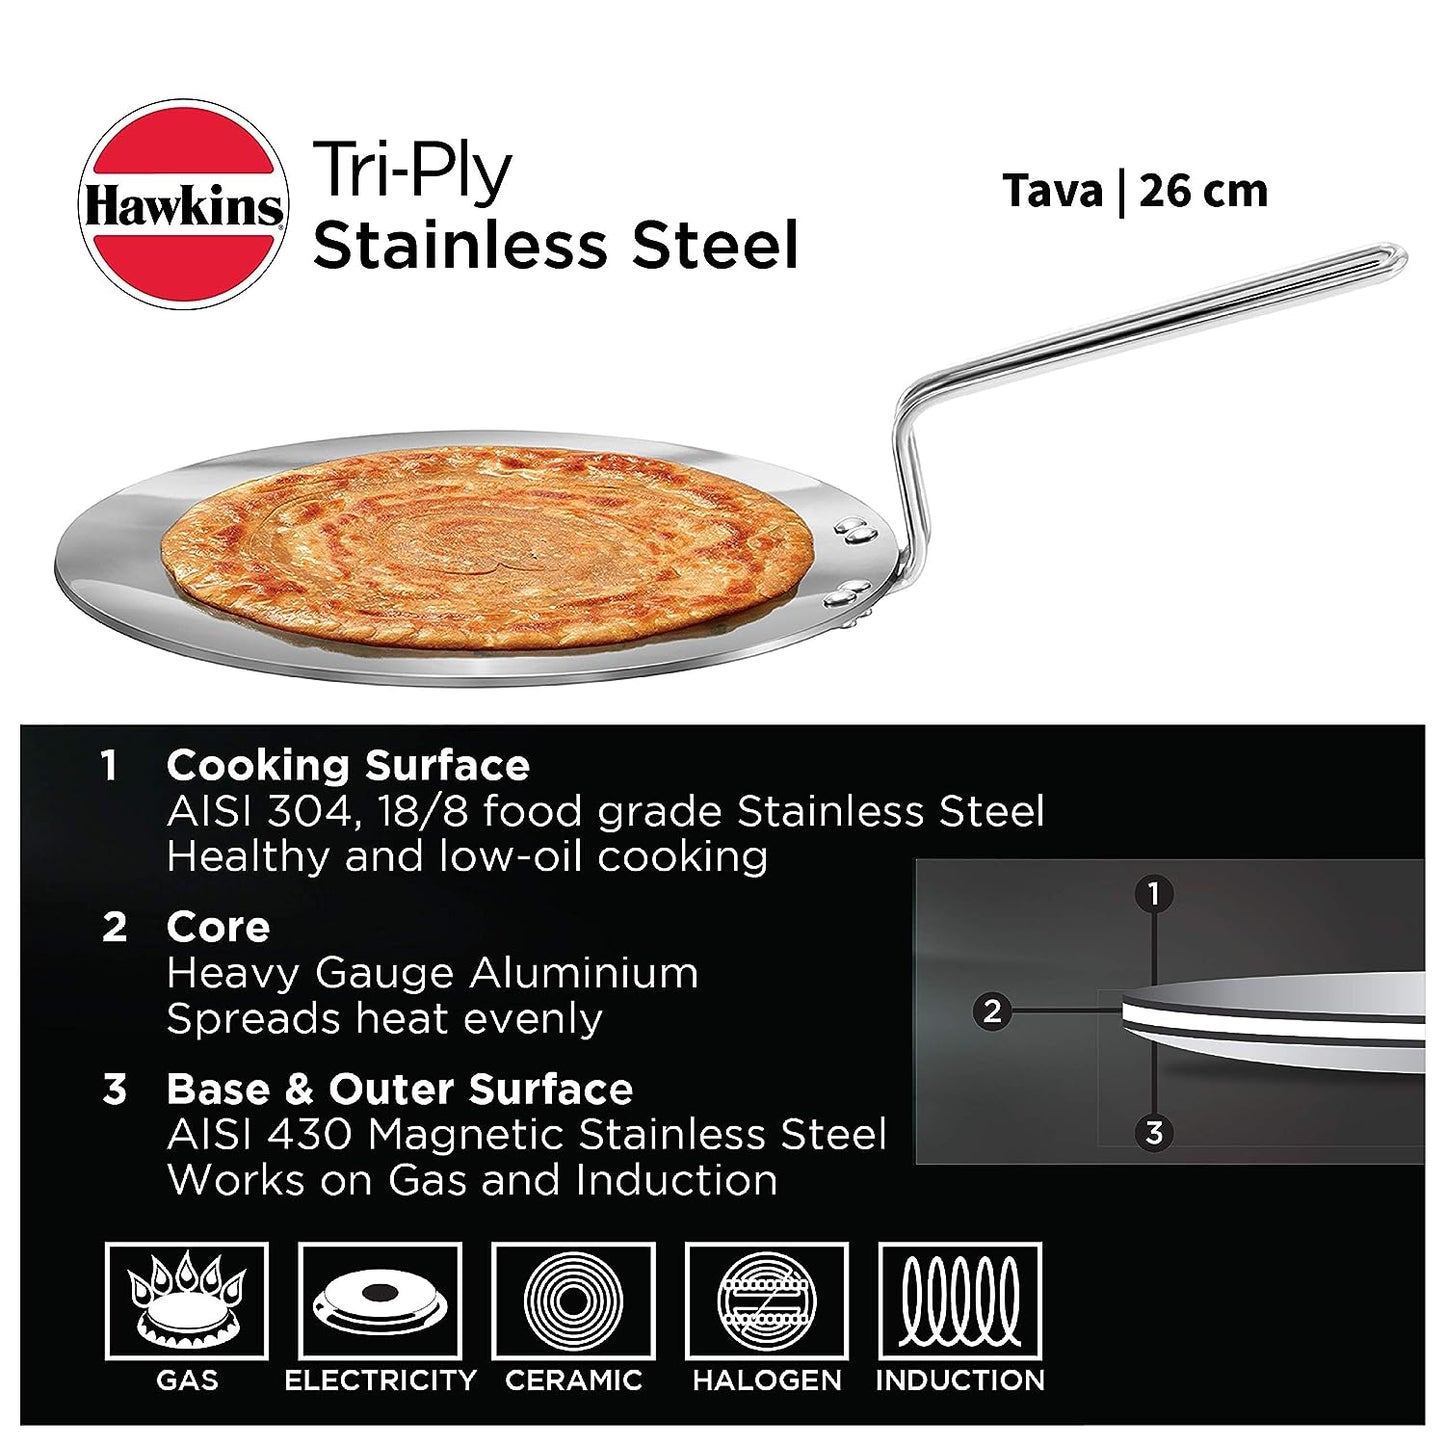 Hawkins Tri-Ply Stainless Steel Tava 26 cm, 3.5mm Induction Compatible - SSTV 26